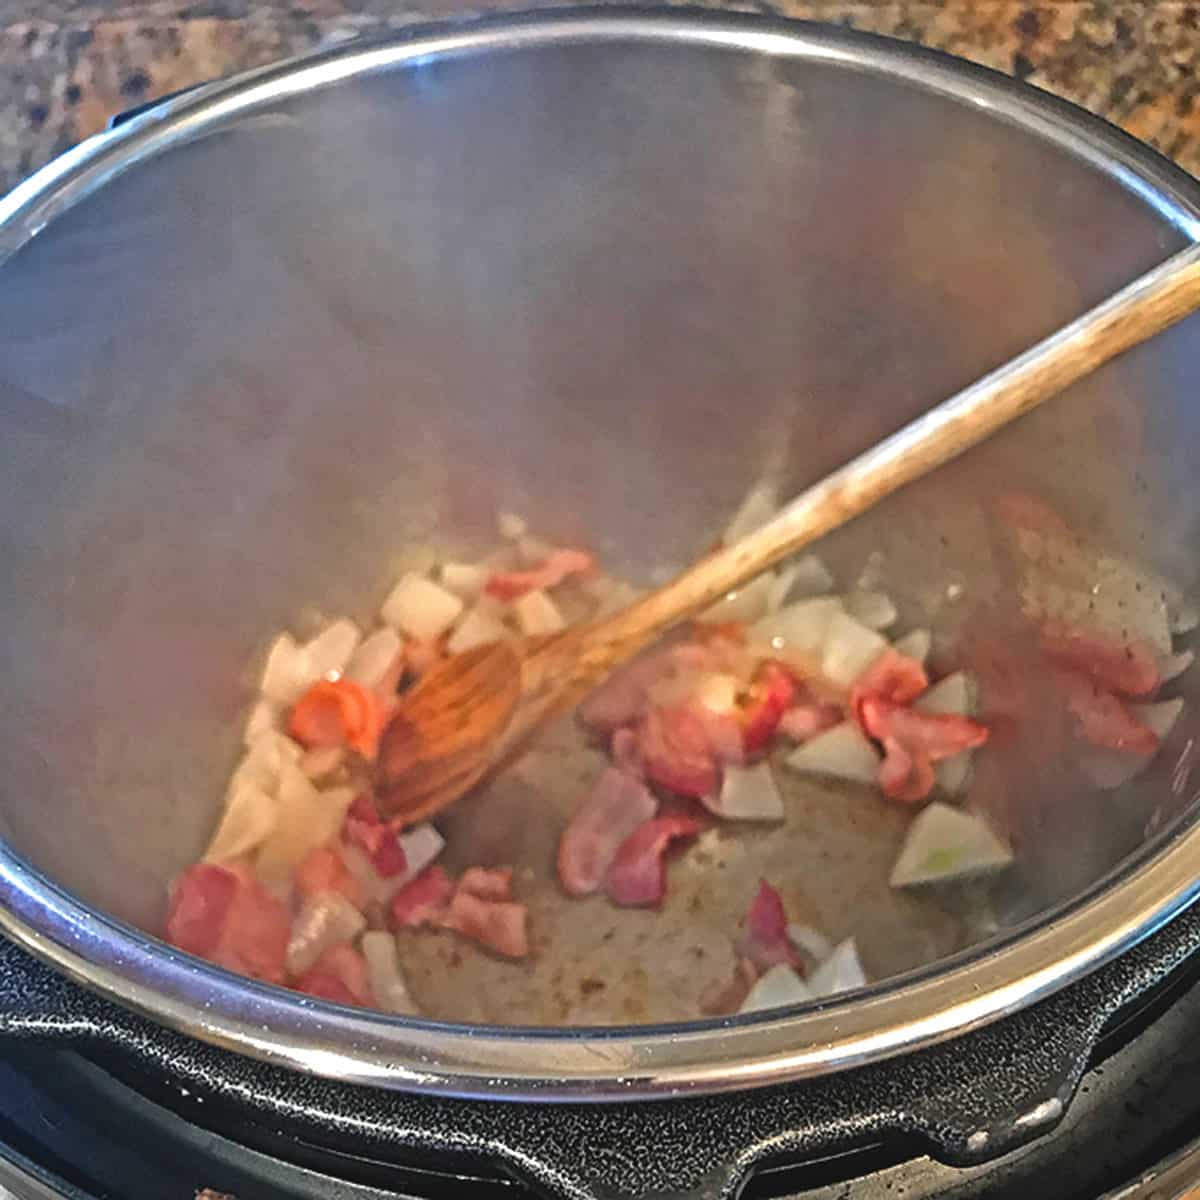 Sauteing some onions and bacon in an instant pot.